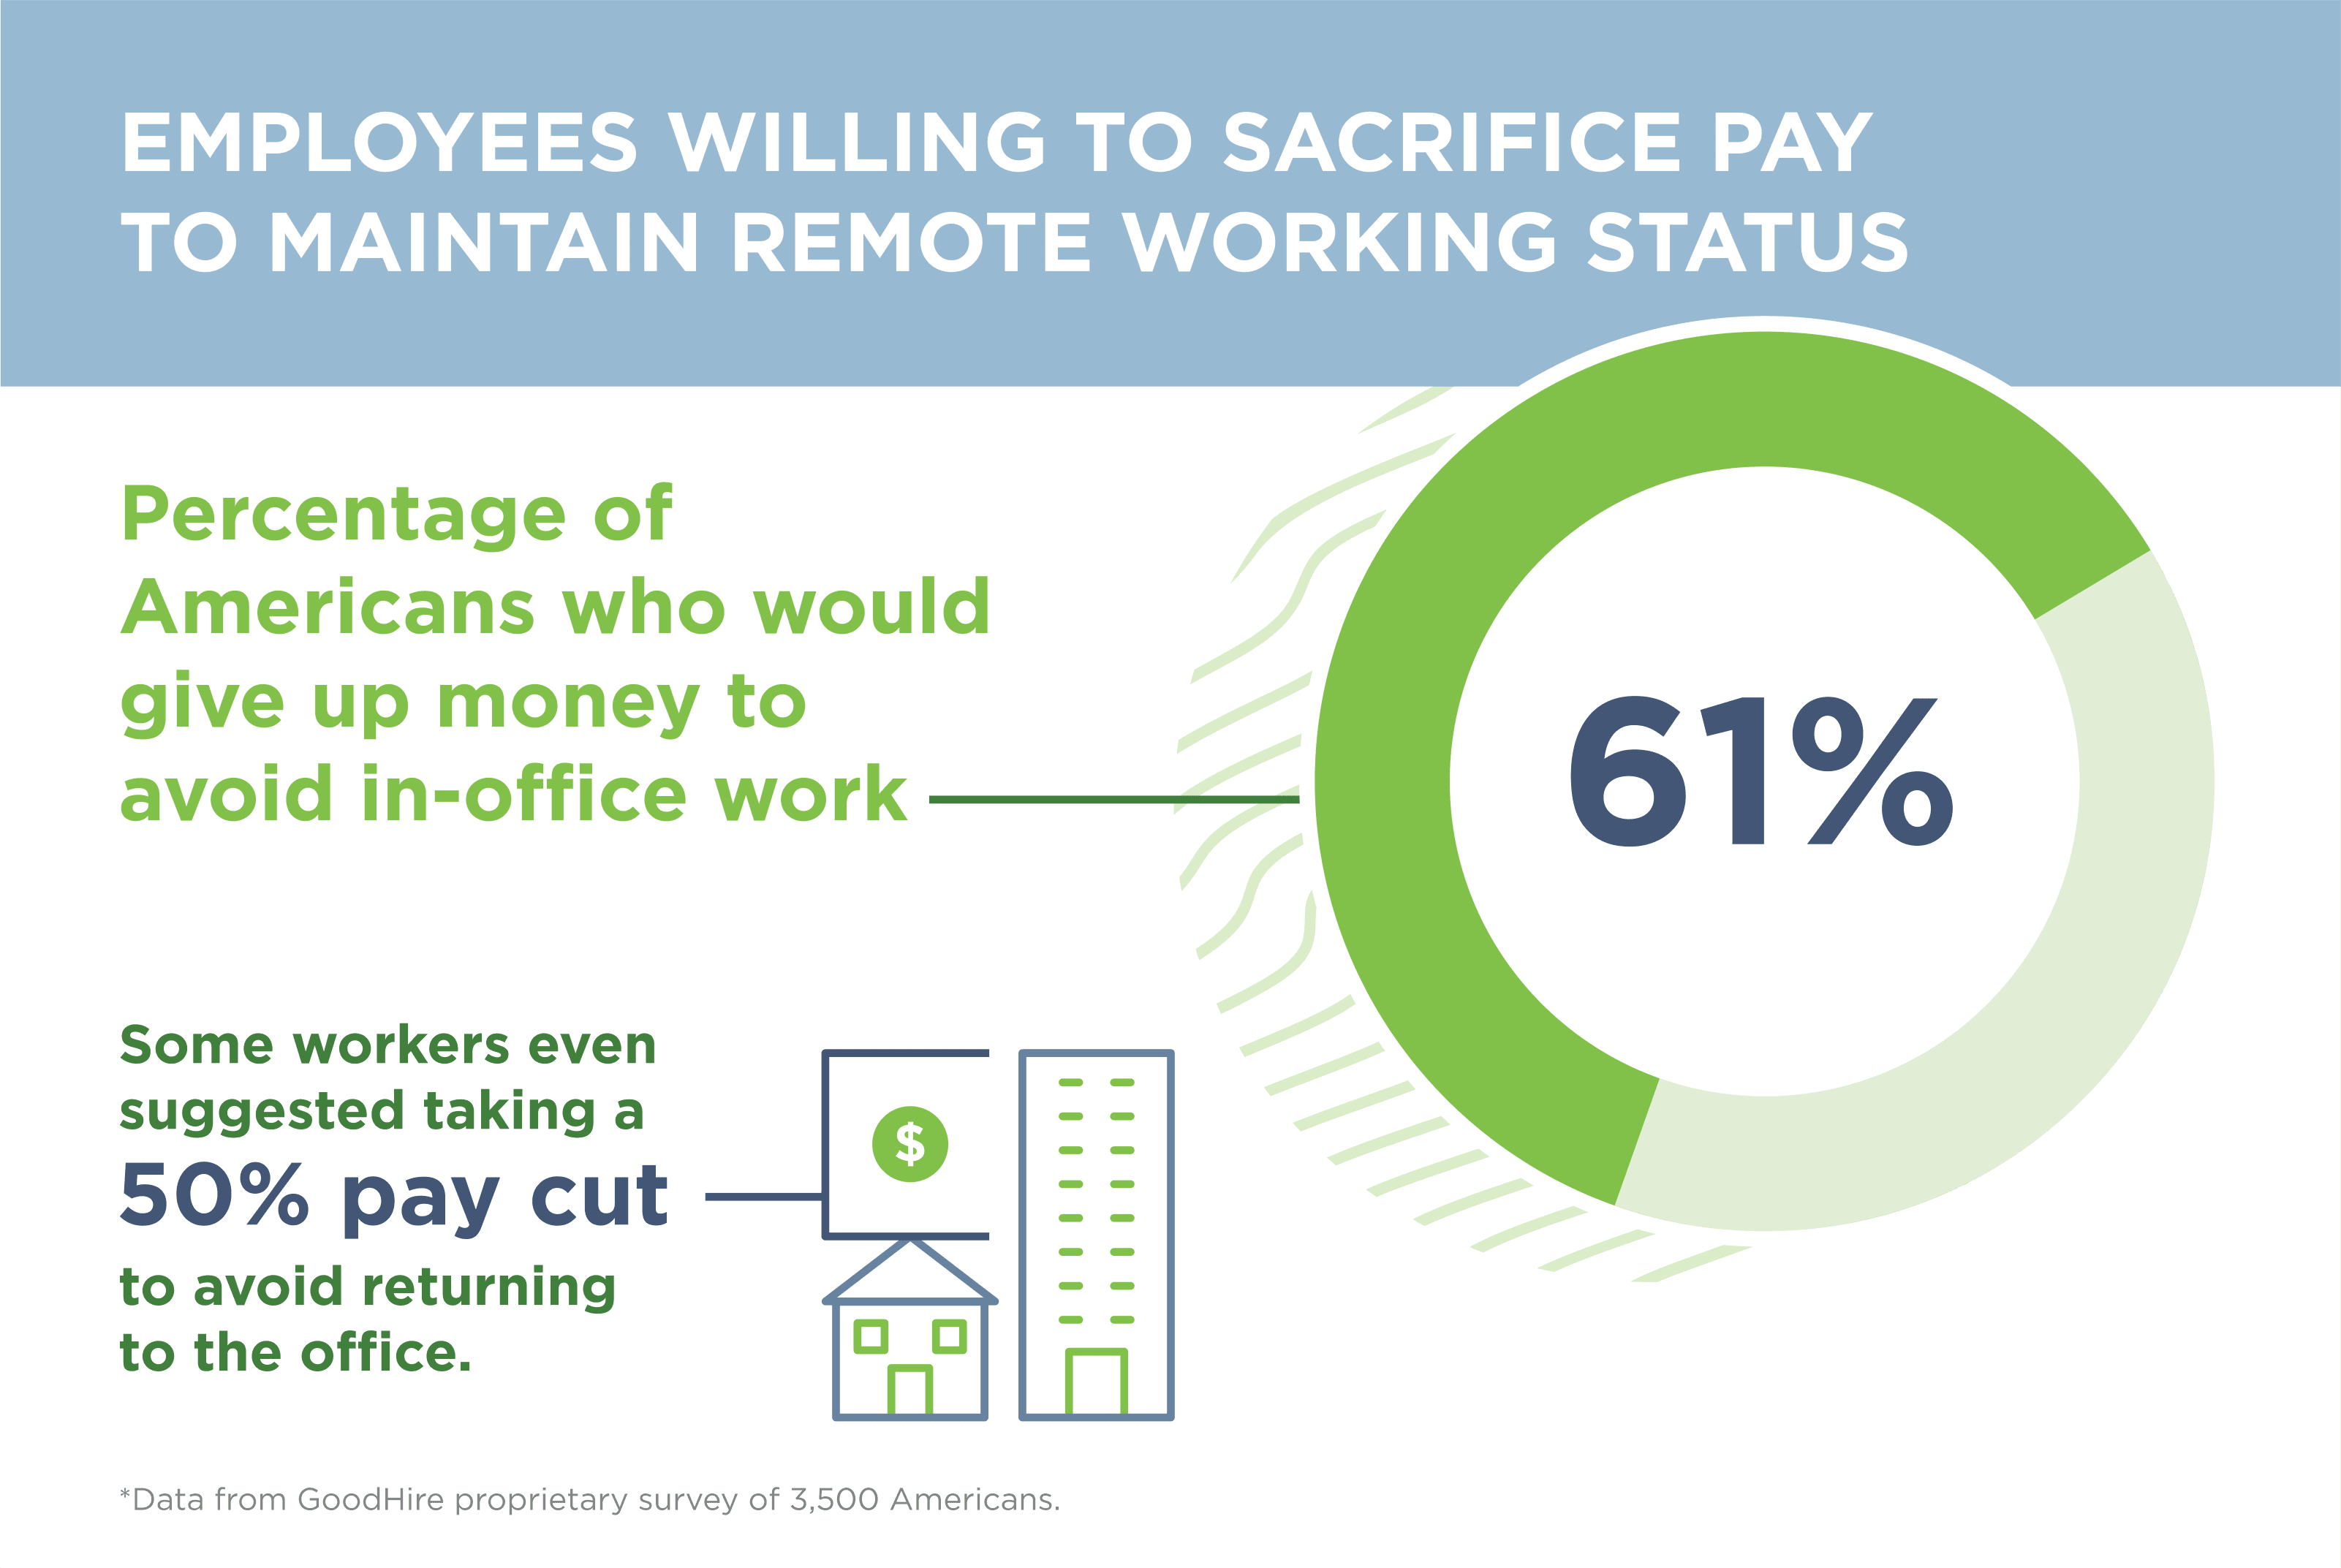 Graph shows 61% of Americans would be willing to take a pay cut to maintain remote working status.